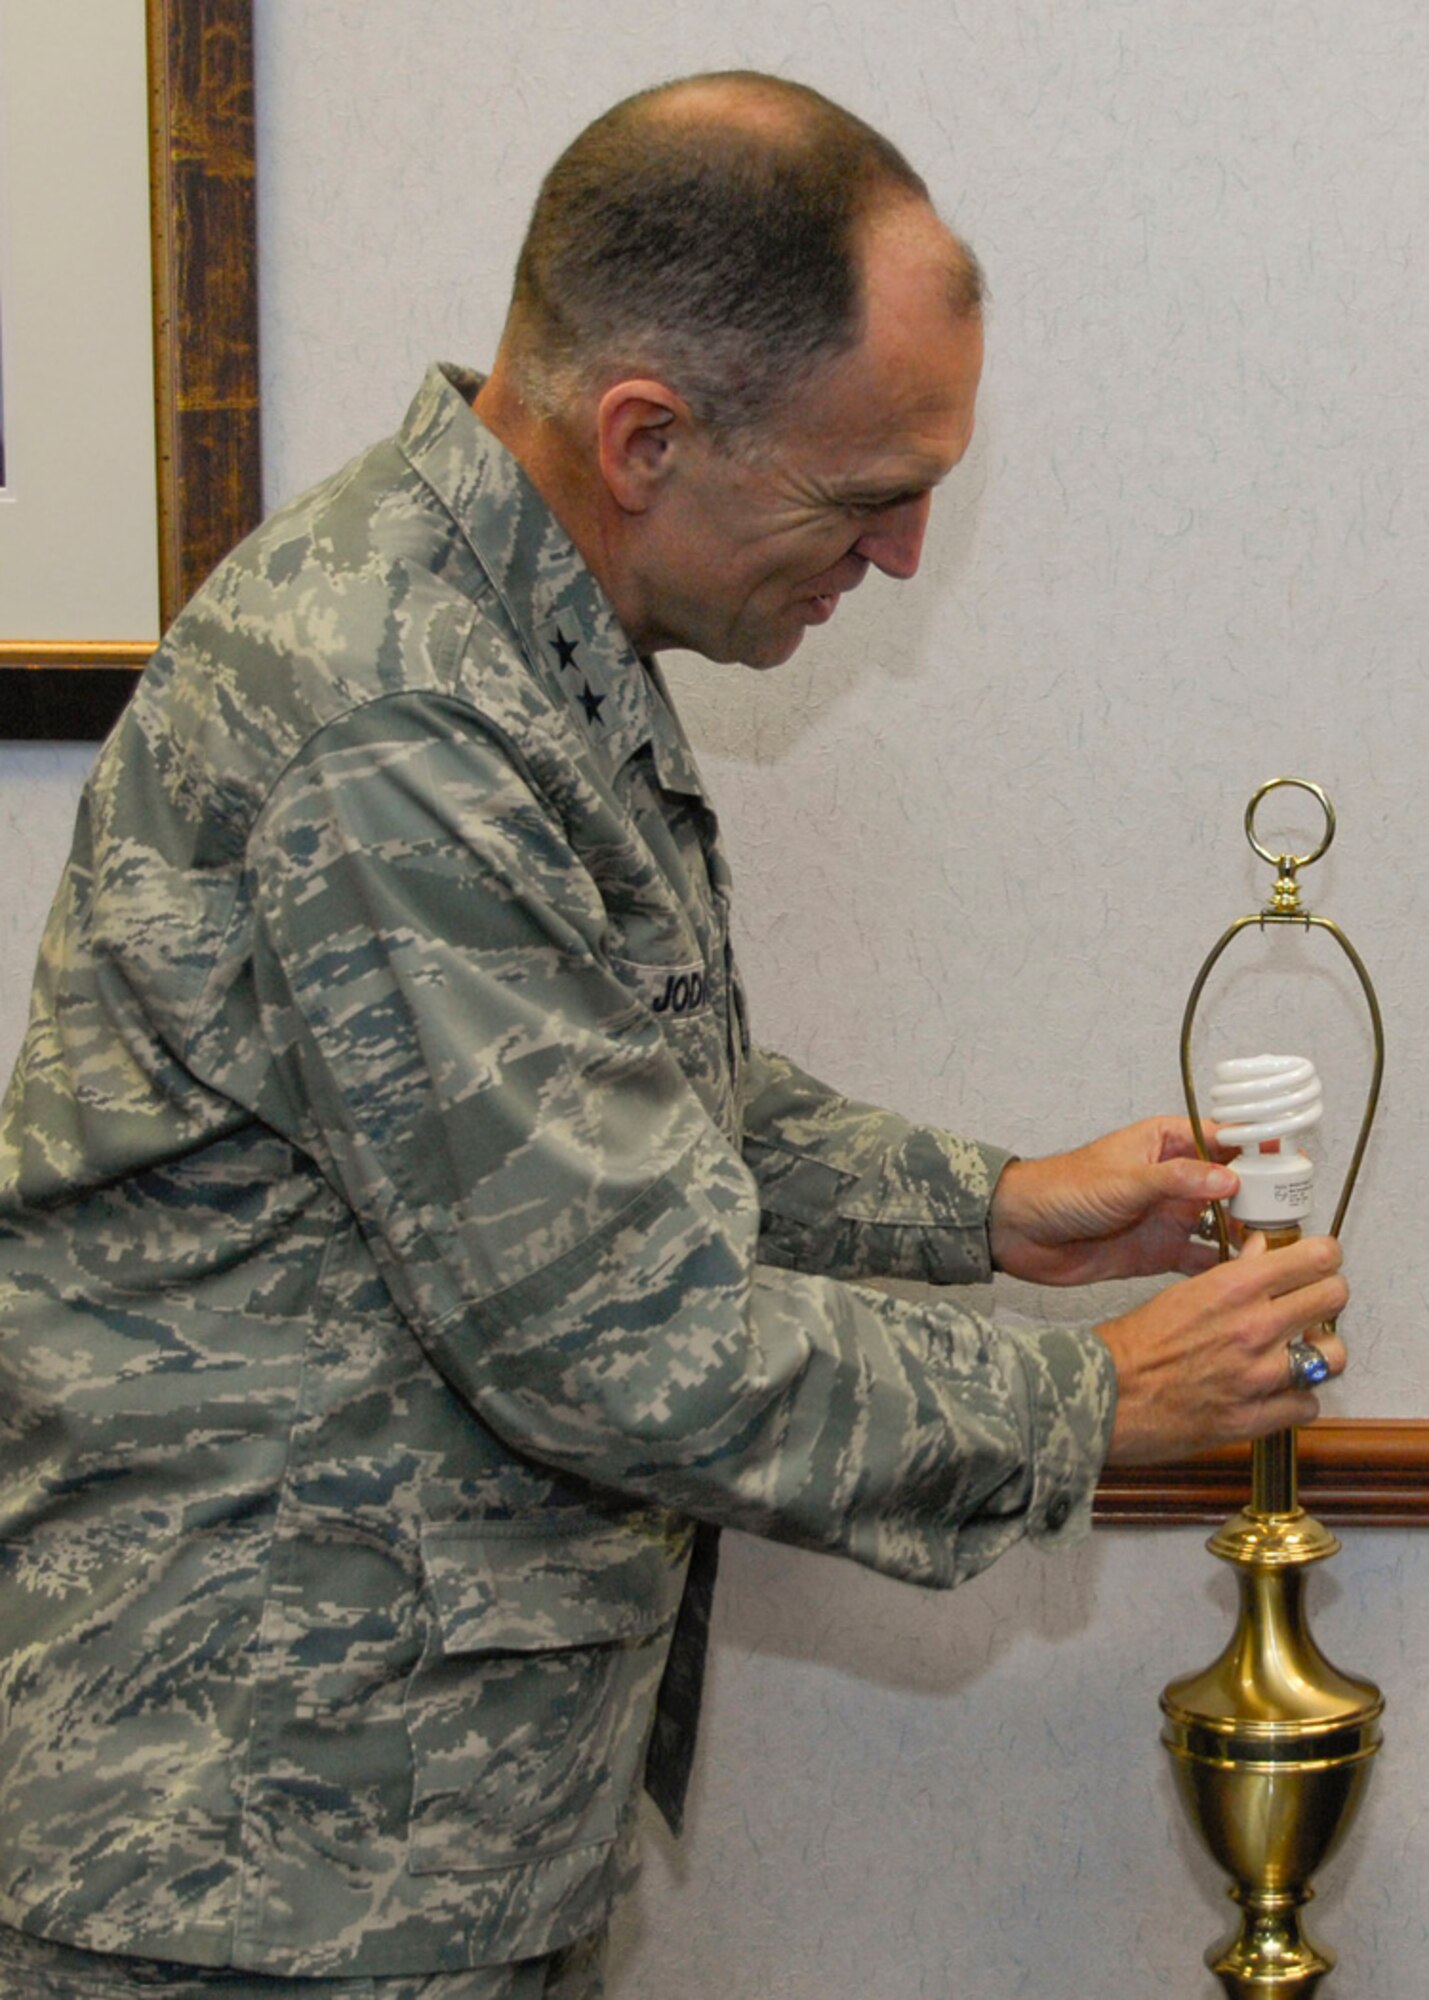 Maj. Gen. Ralph J. Jodice II, Air Force District of Washington commanding general, replaces an incandescent light bulb with a compact fluorescent light bulb in his office at Andrews Air Force Base, Md. AFDW is participating in Operation Change Out, a jointly-sponsored effort between the Defense Department and the U.S. Department of Energy that encourages everyone connected with a military installation to reduce energy usage.